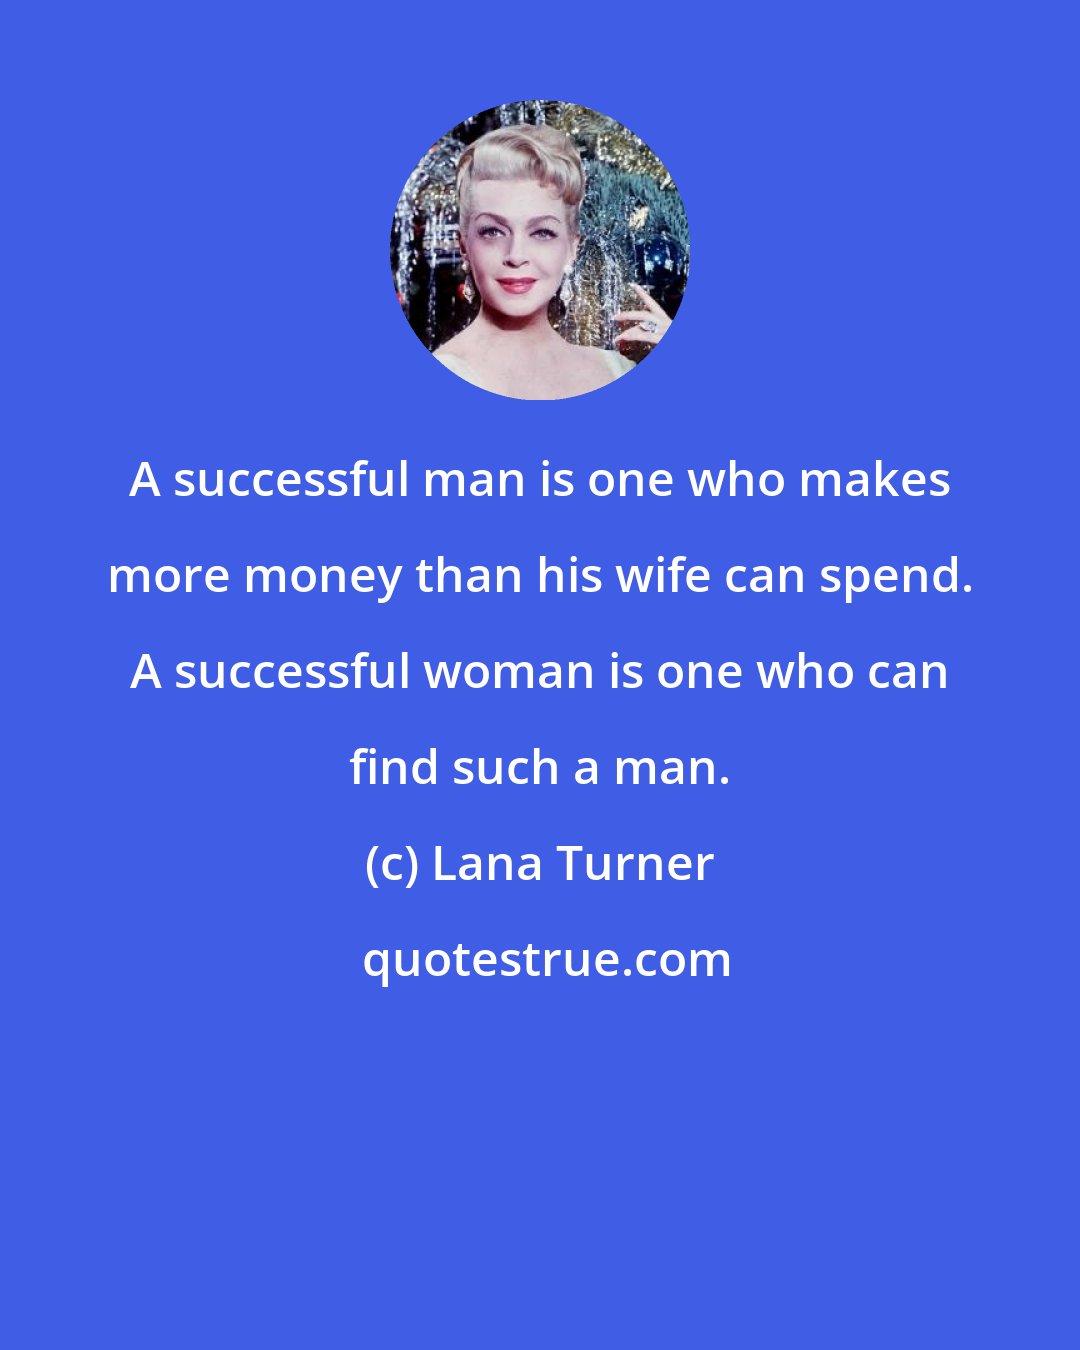 Lana Turner: A successful man is one who makes more money than his wife can spend. A successful woman is one who can find such a man.